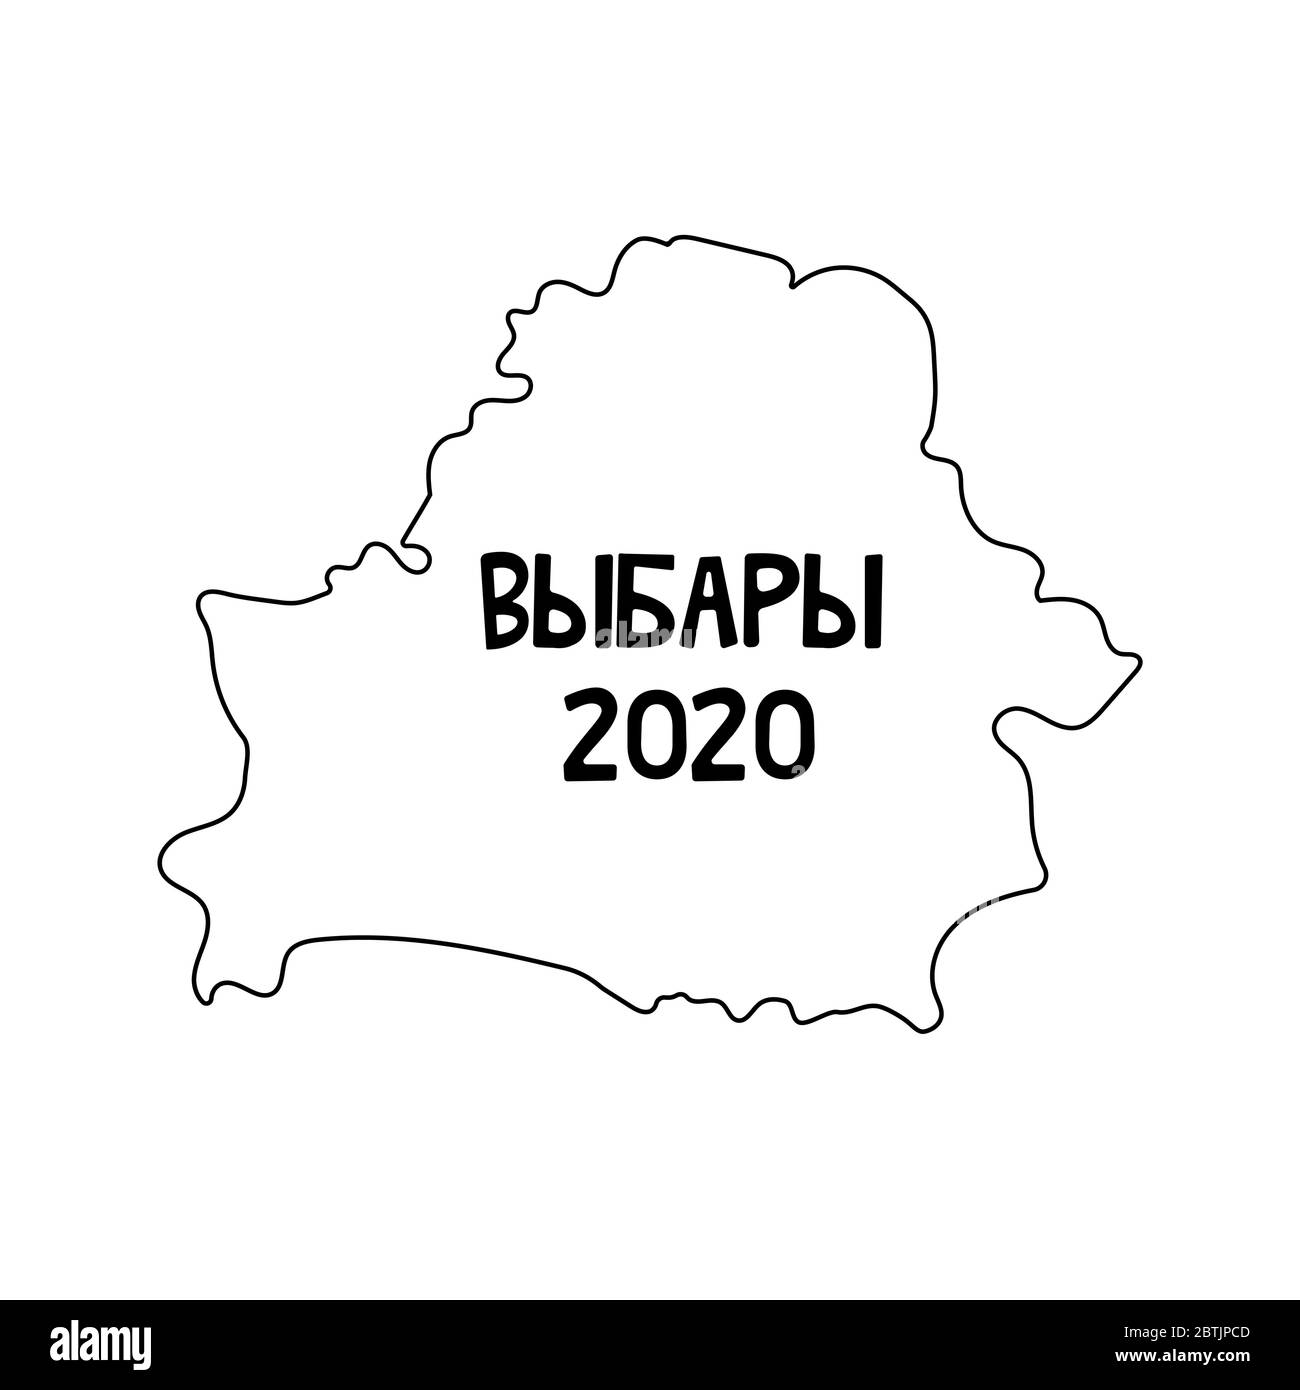 Presidential election 2020. Belarus map in a line style. Black and white vector illustration isolated on white background Stock Vector